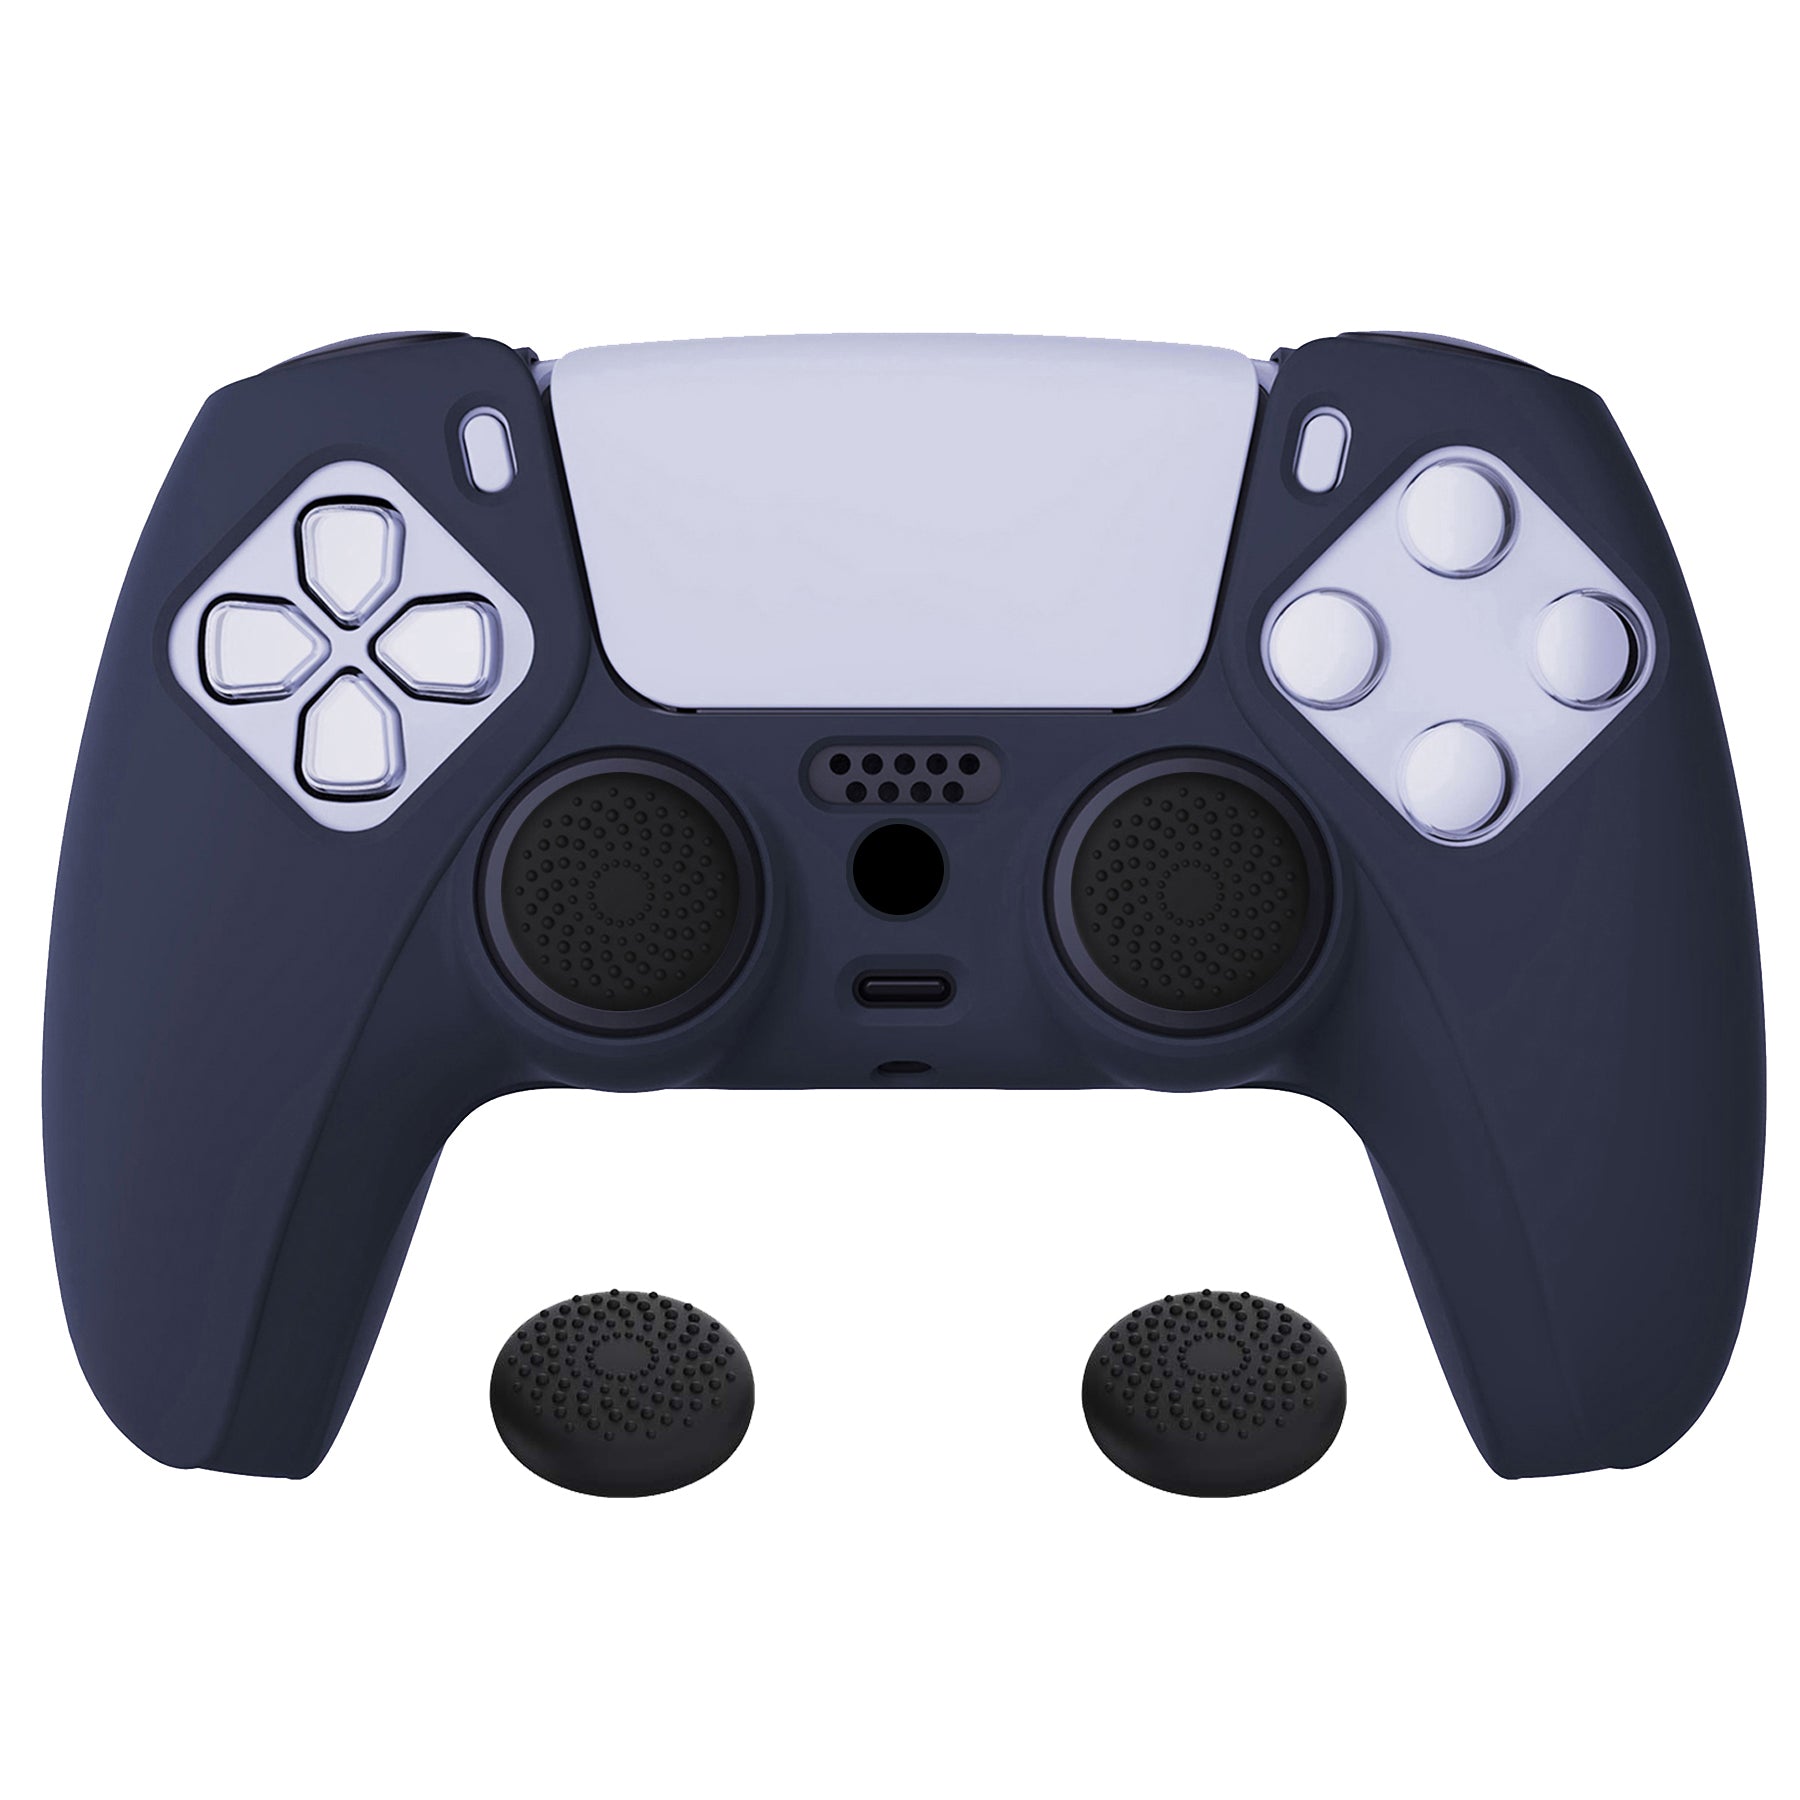 PlayVital Pure Series Anti-Slip Silicone Cover Skin with Thumb Grip Caps for PS5 Wireless Controller - Midnight Blue - KOPF003 PlayVital